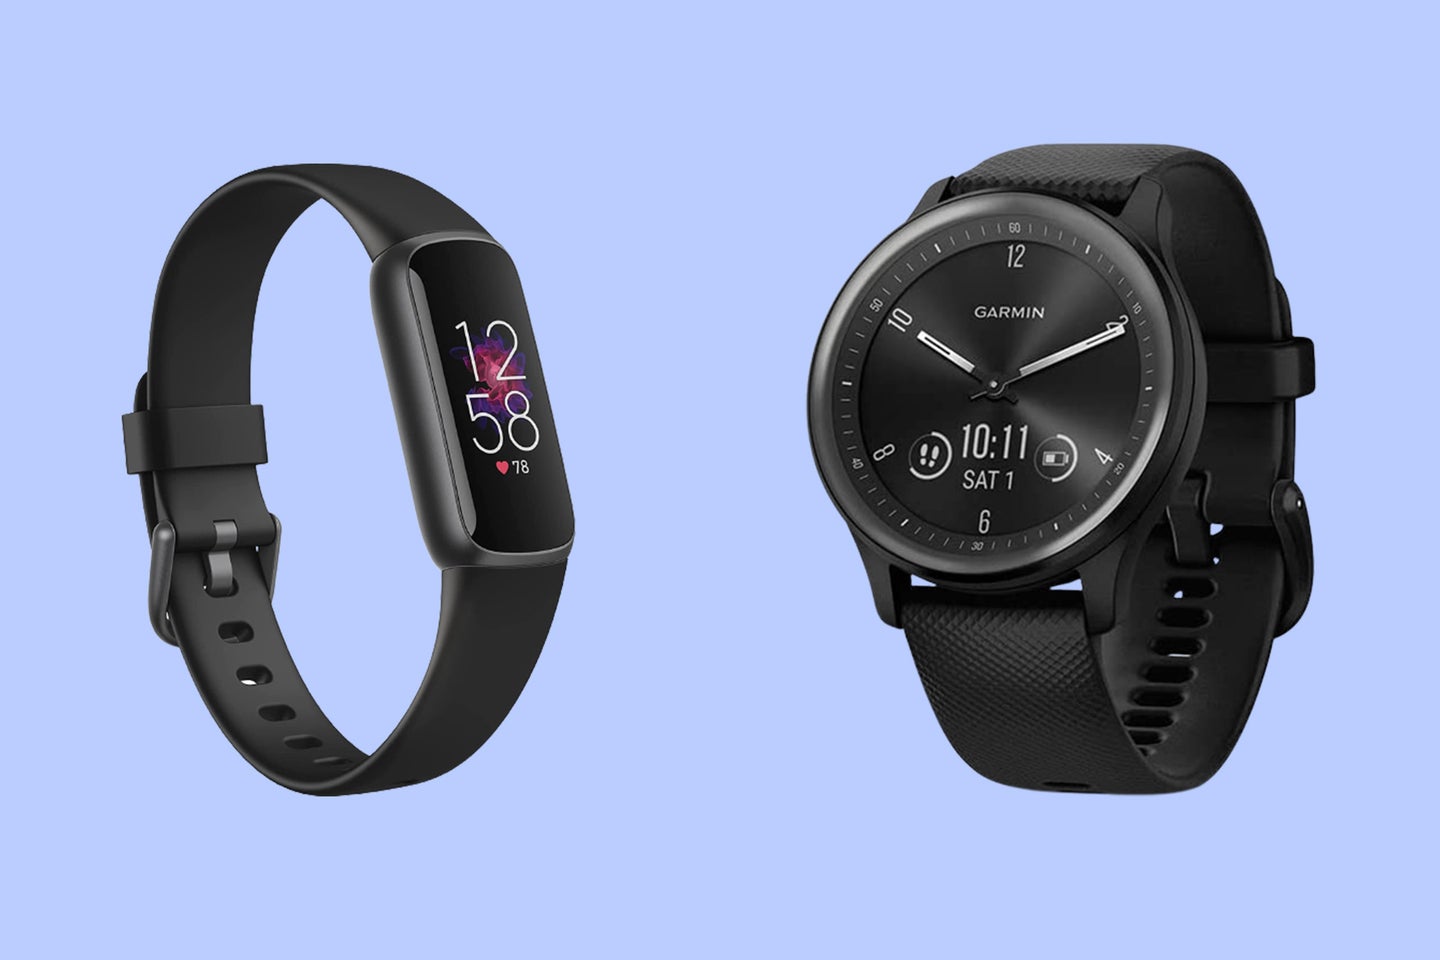 Two smartwatches on a periwinkle background